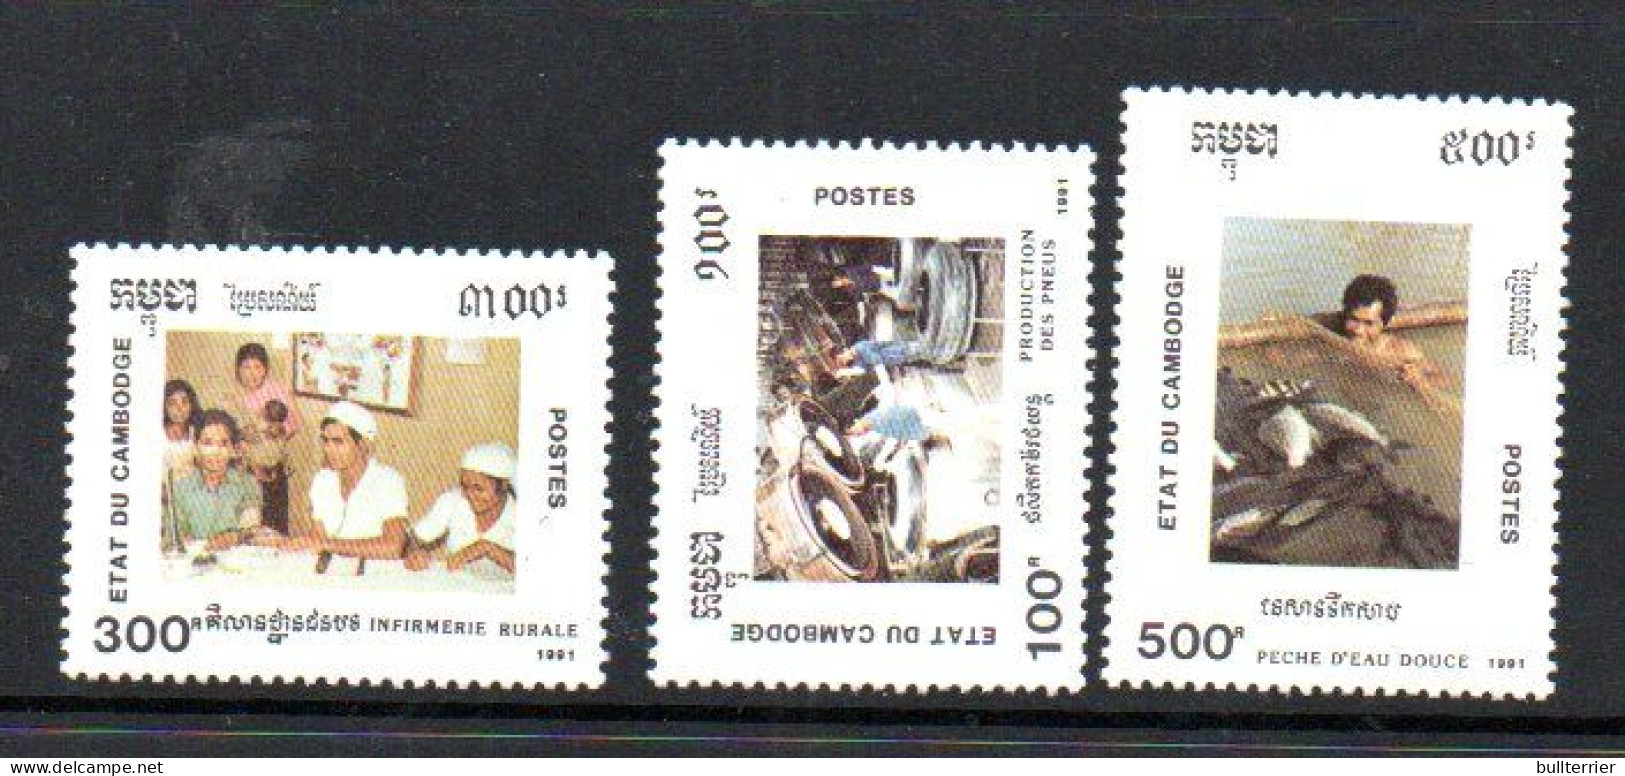 CAMBODIA - 1991  FOOD INDUSTRY  SET OF 3  MINT NEVER HINGED - Cambogia